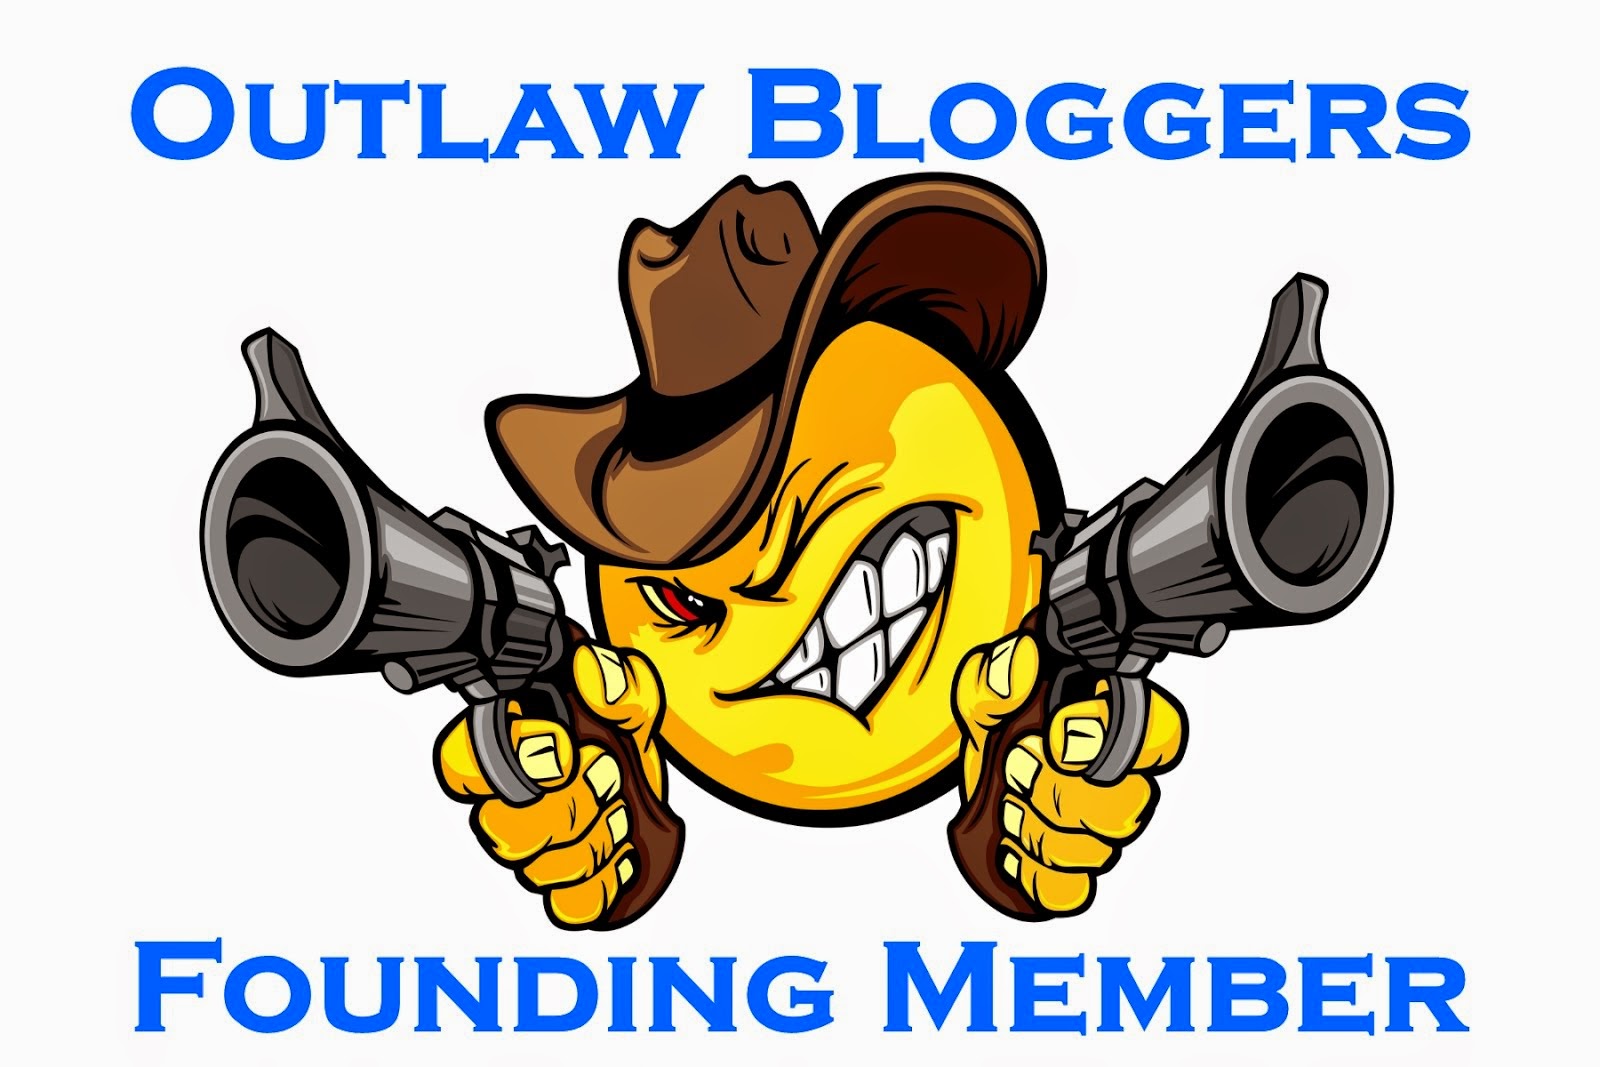 Founder: Outlaw Bloggers